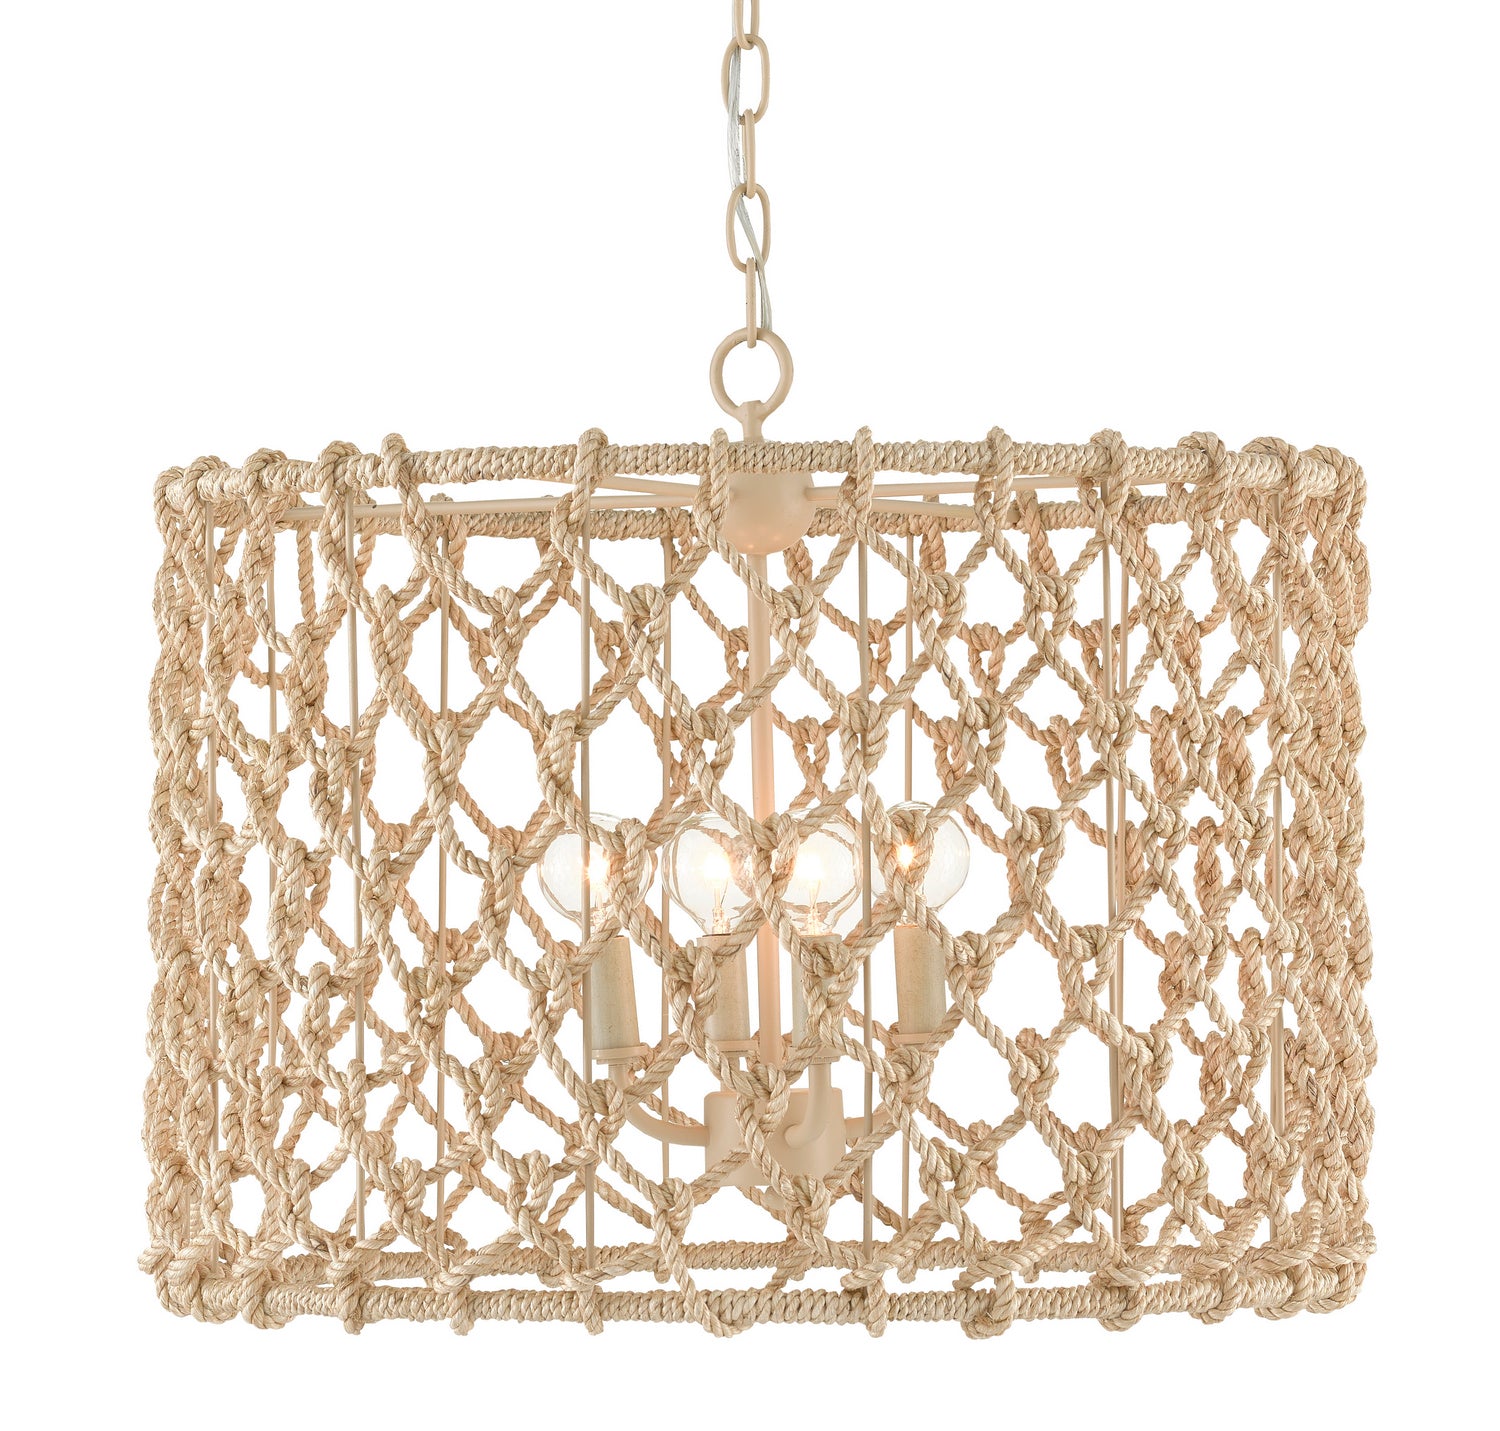 Four Light Chandelier from the Chesapeake collection in Beige/Smokewood/Natural Rope finish